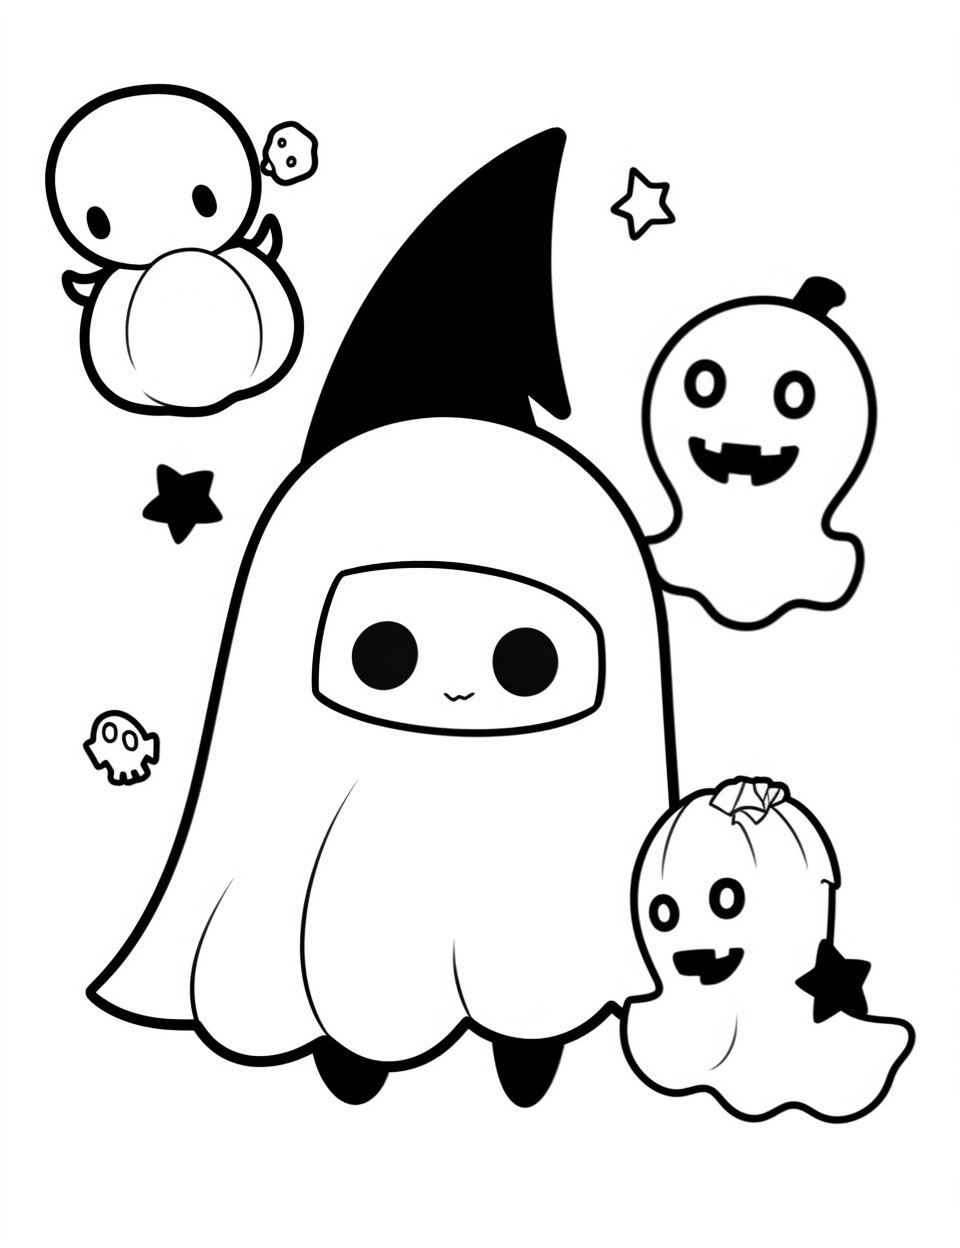 Spooky halloween coloring pages for kids and adults